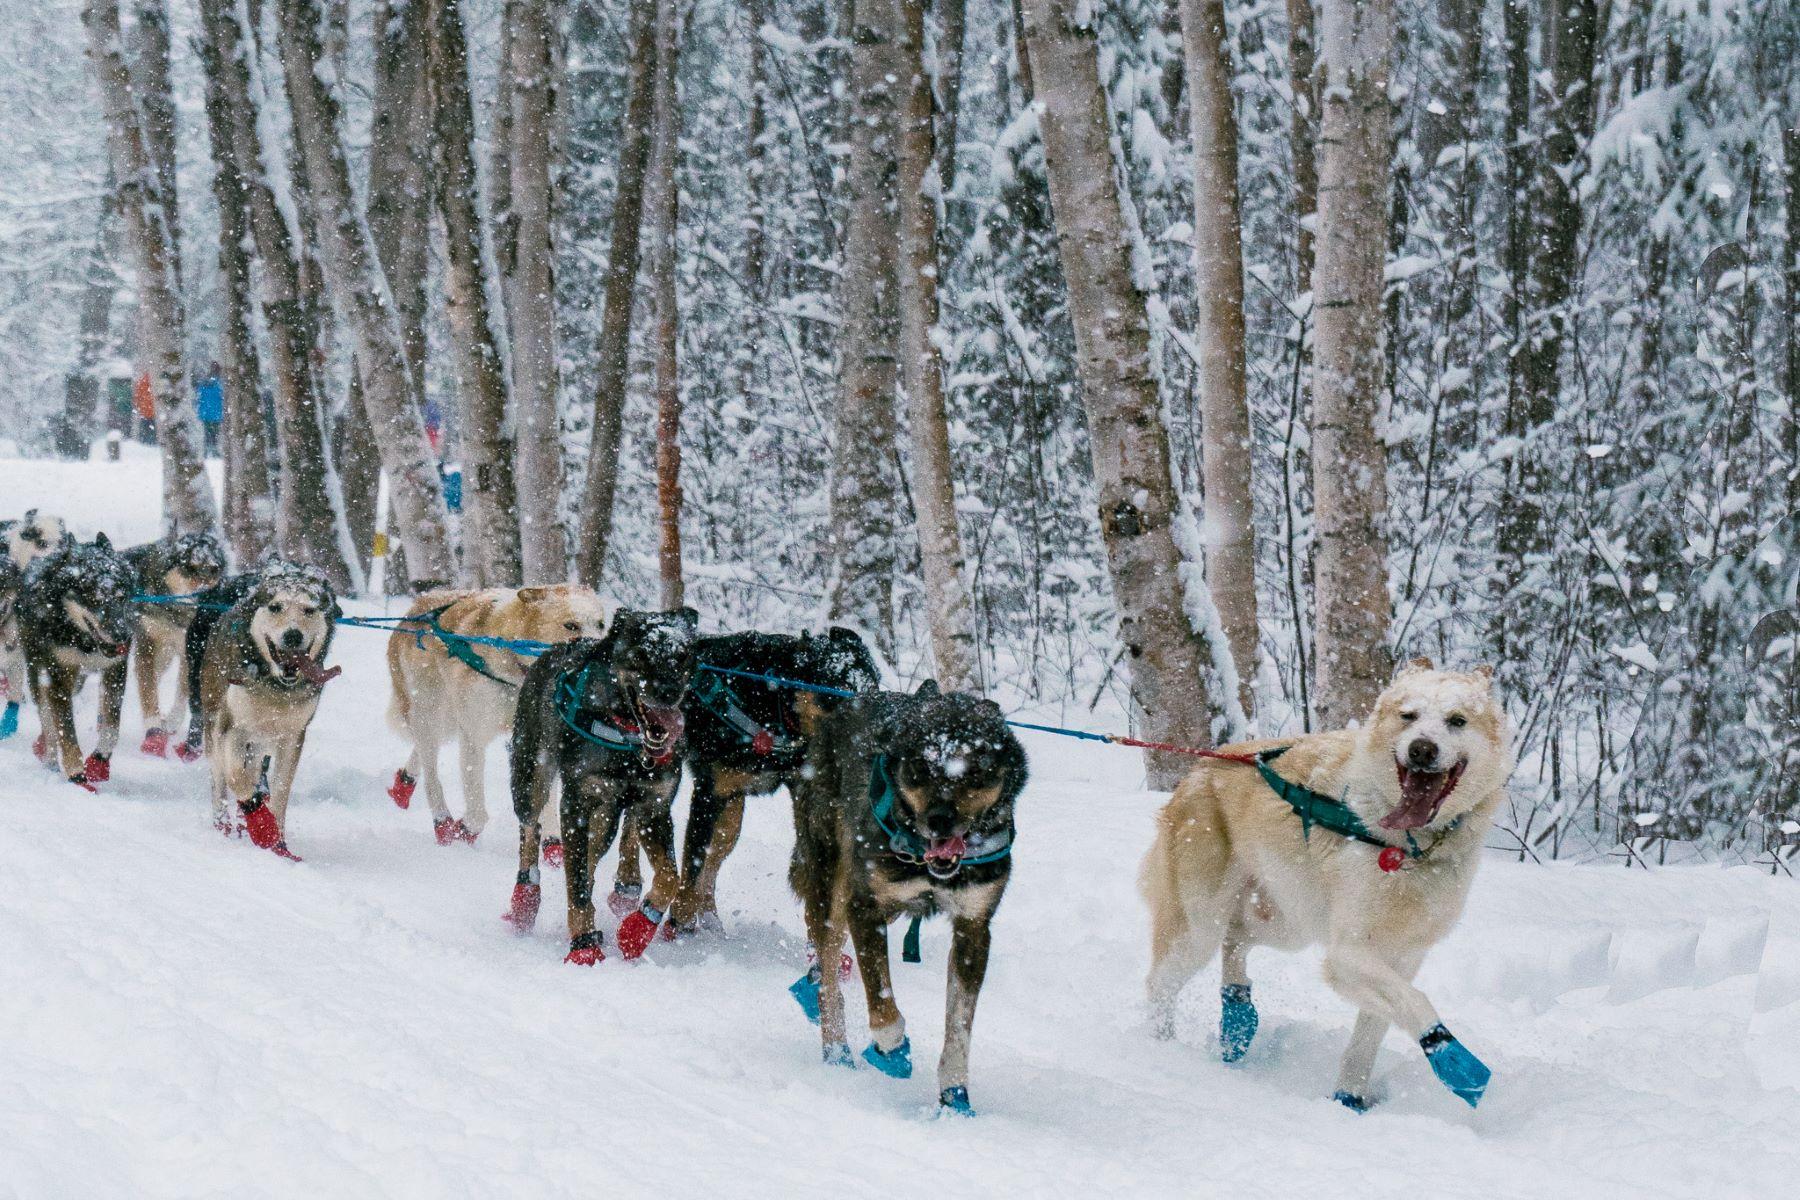 The Many Faces of a Dog Sled Team